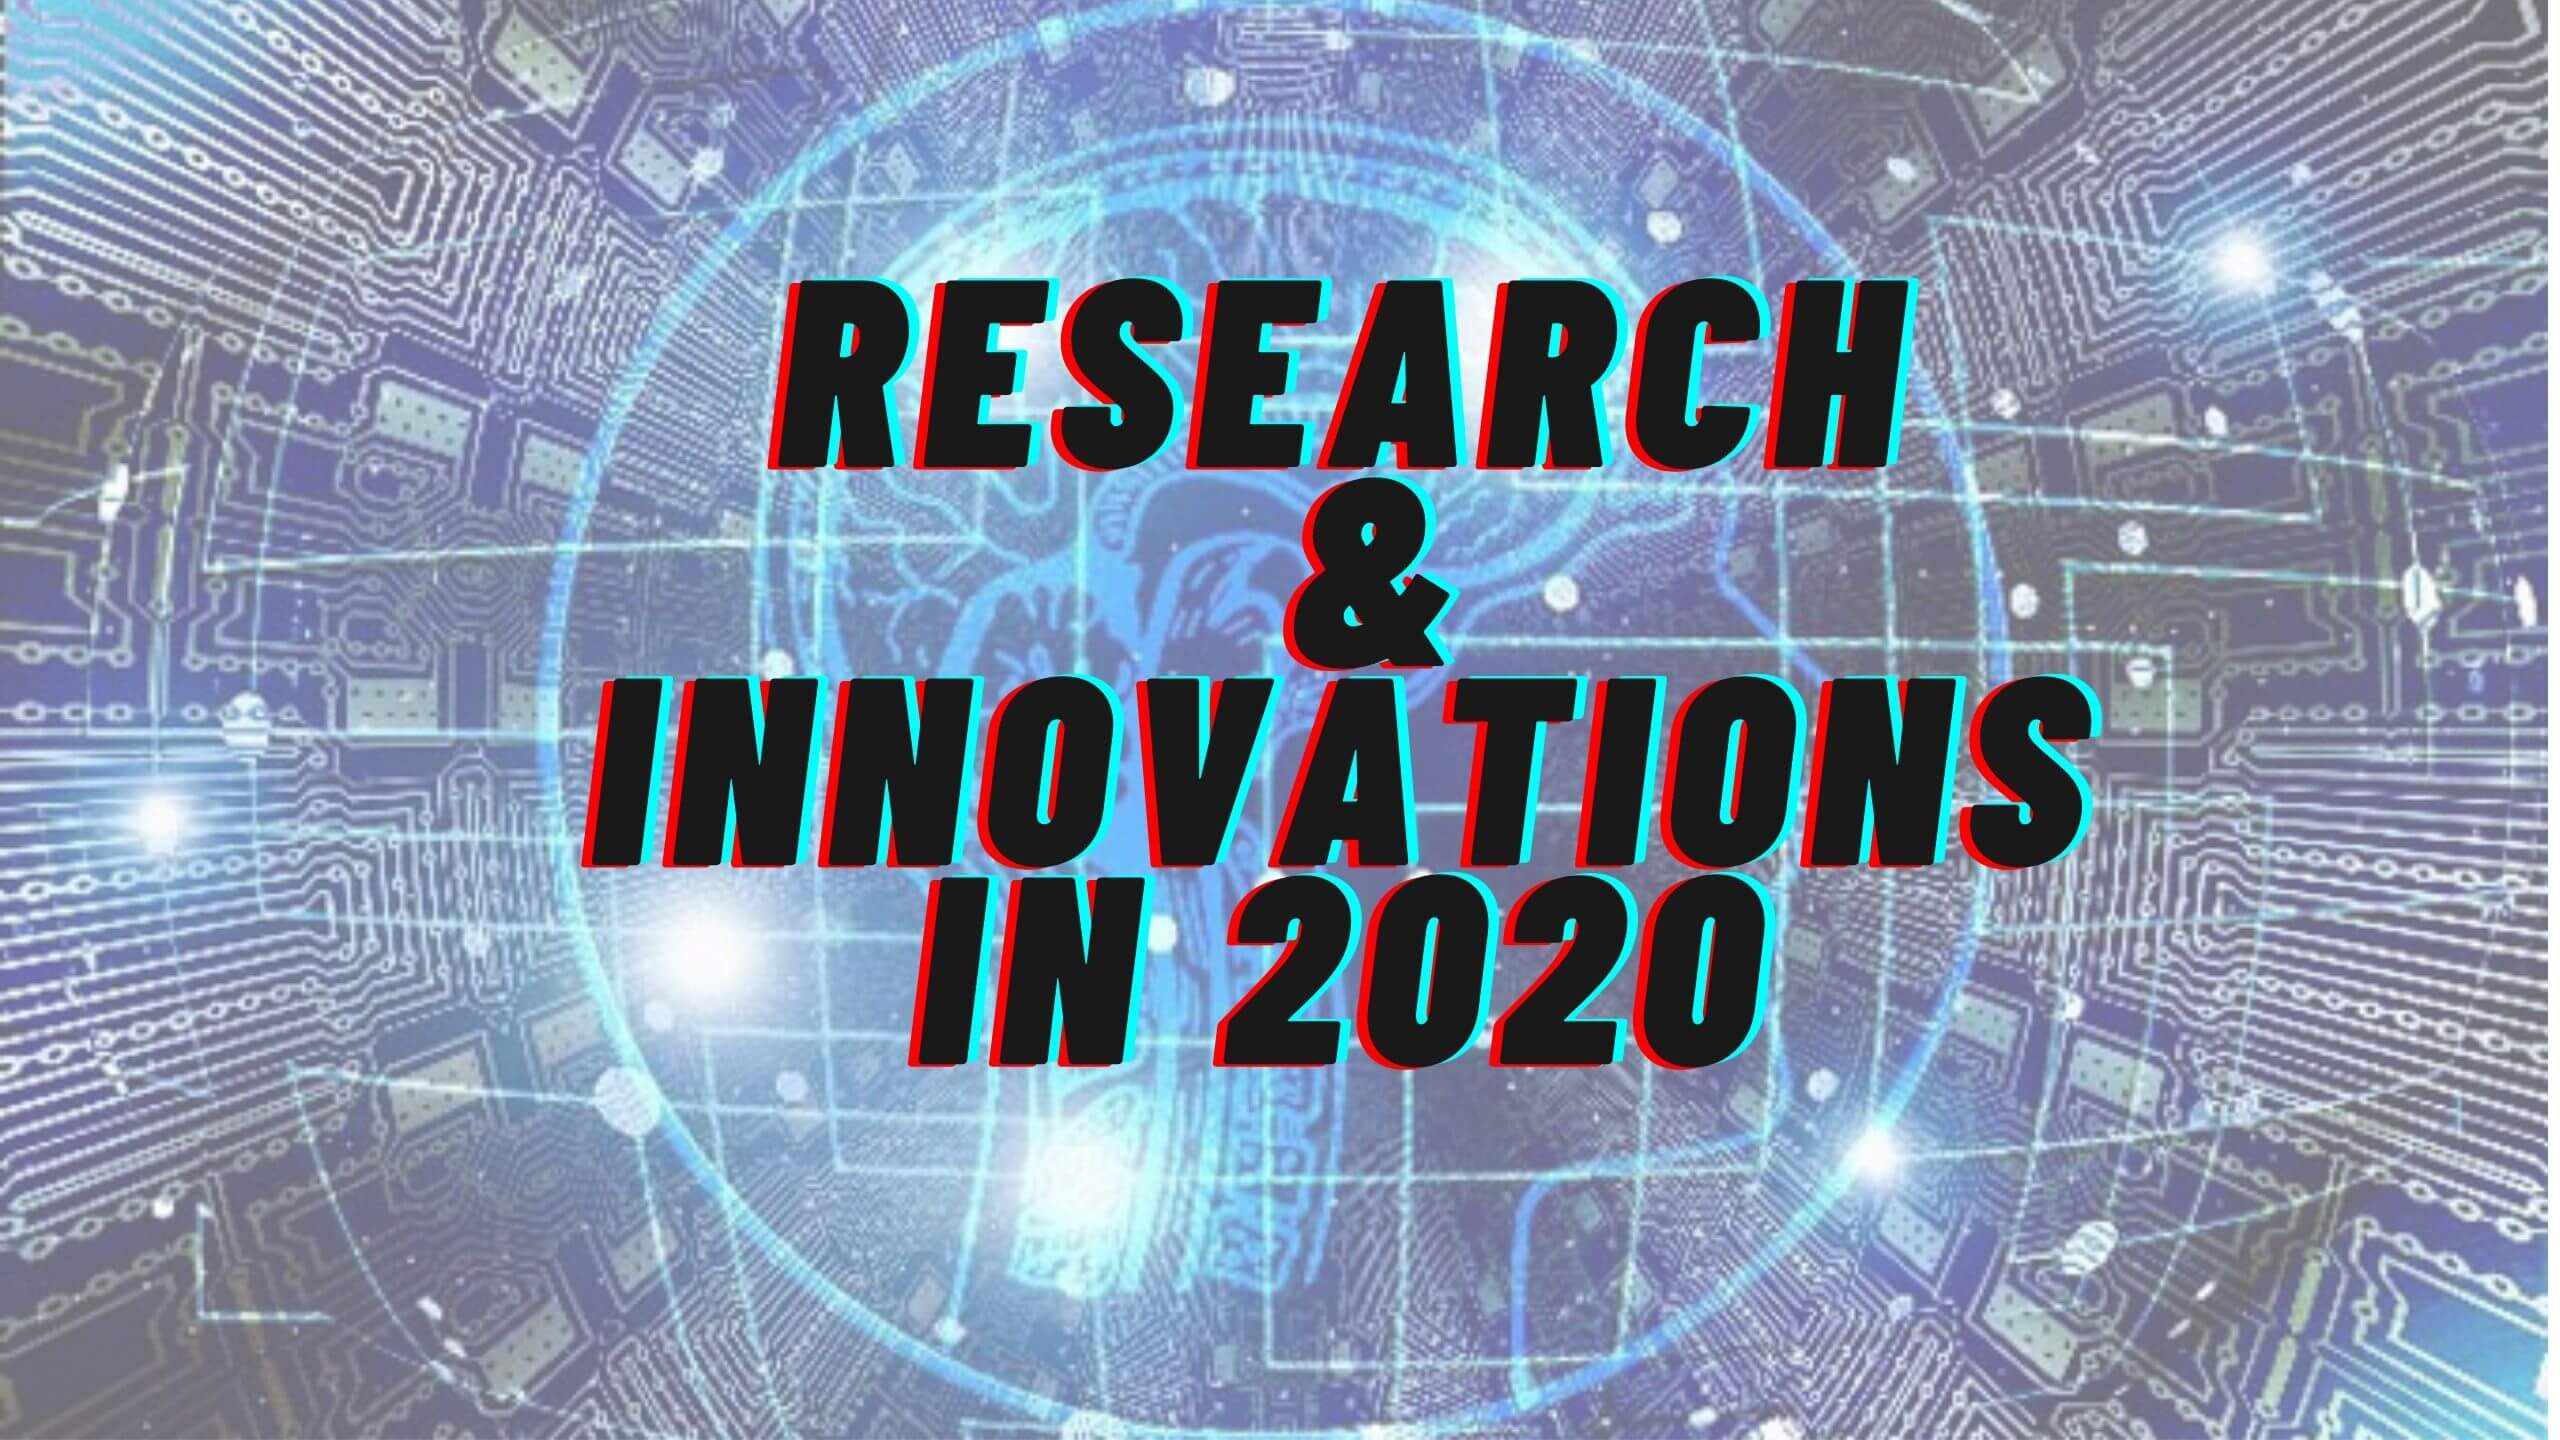 What’s stored in “Research and Innovations in 2020” magazine?